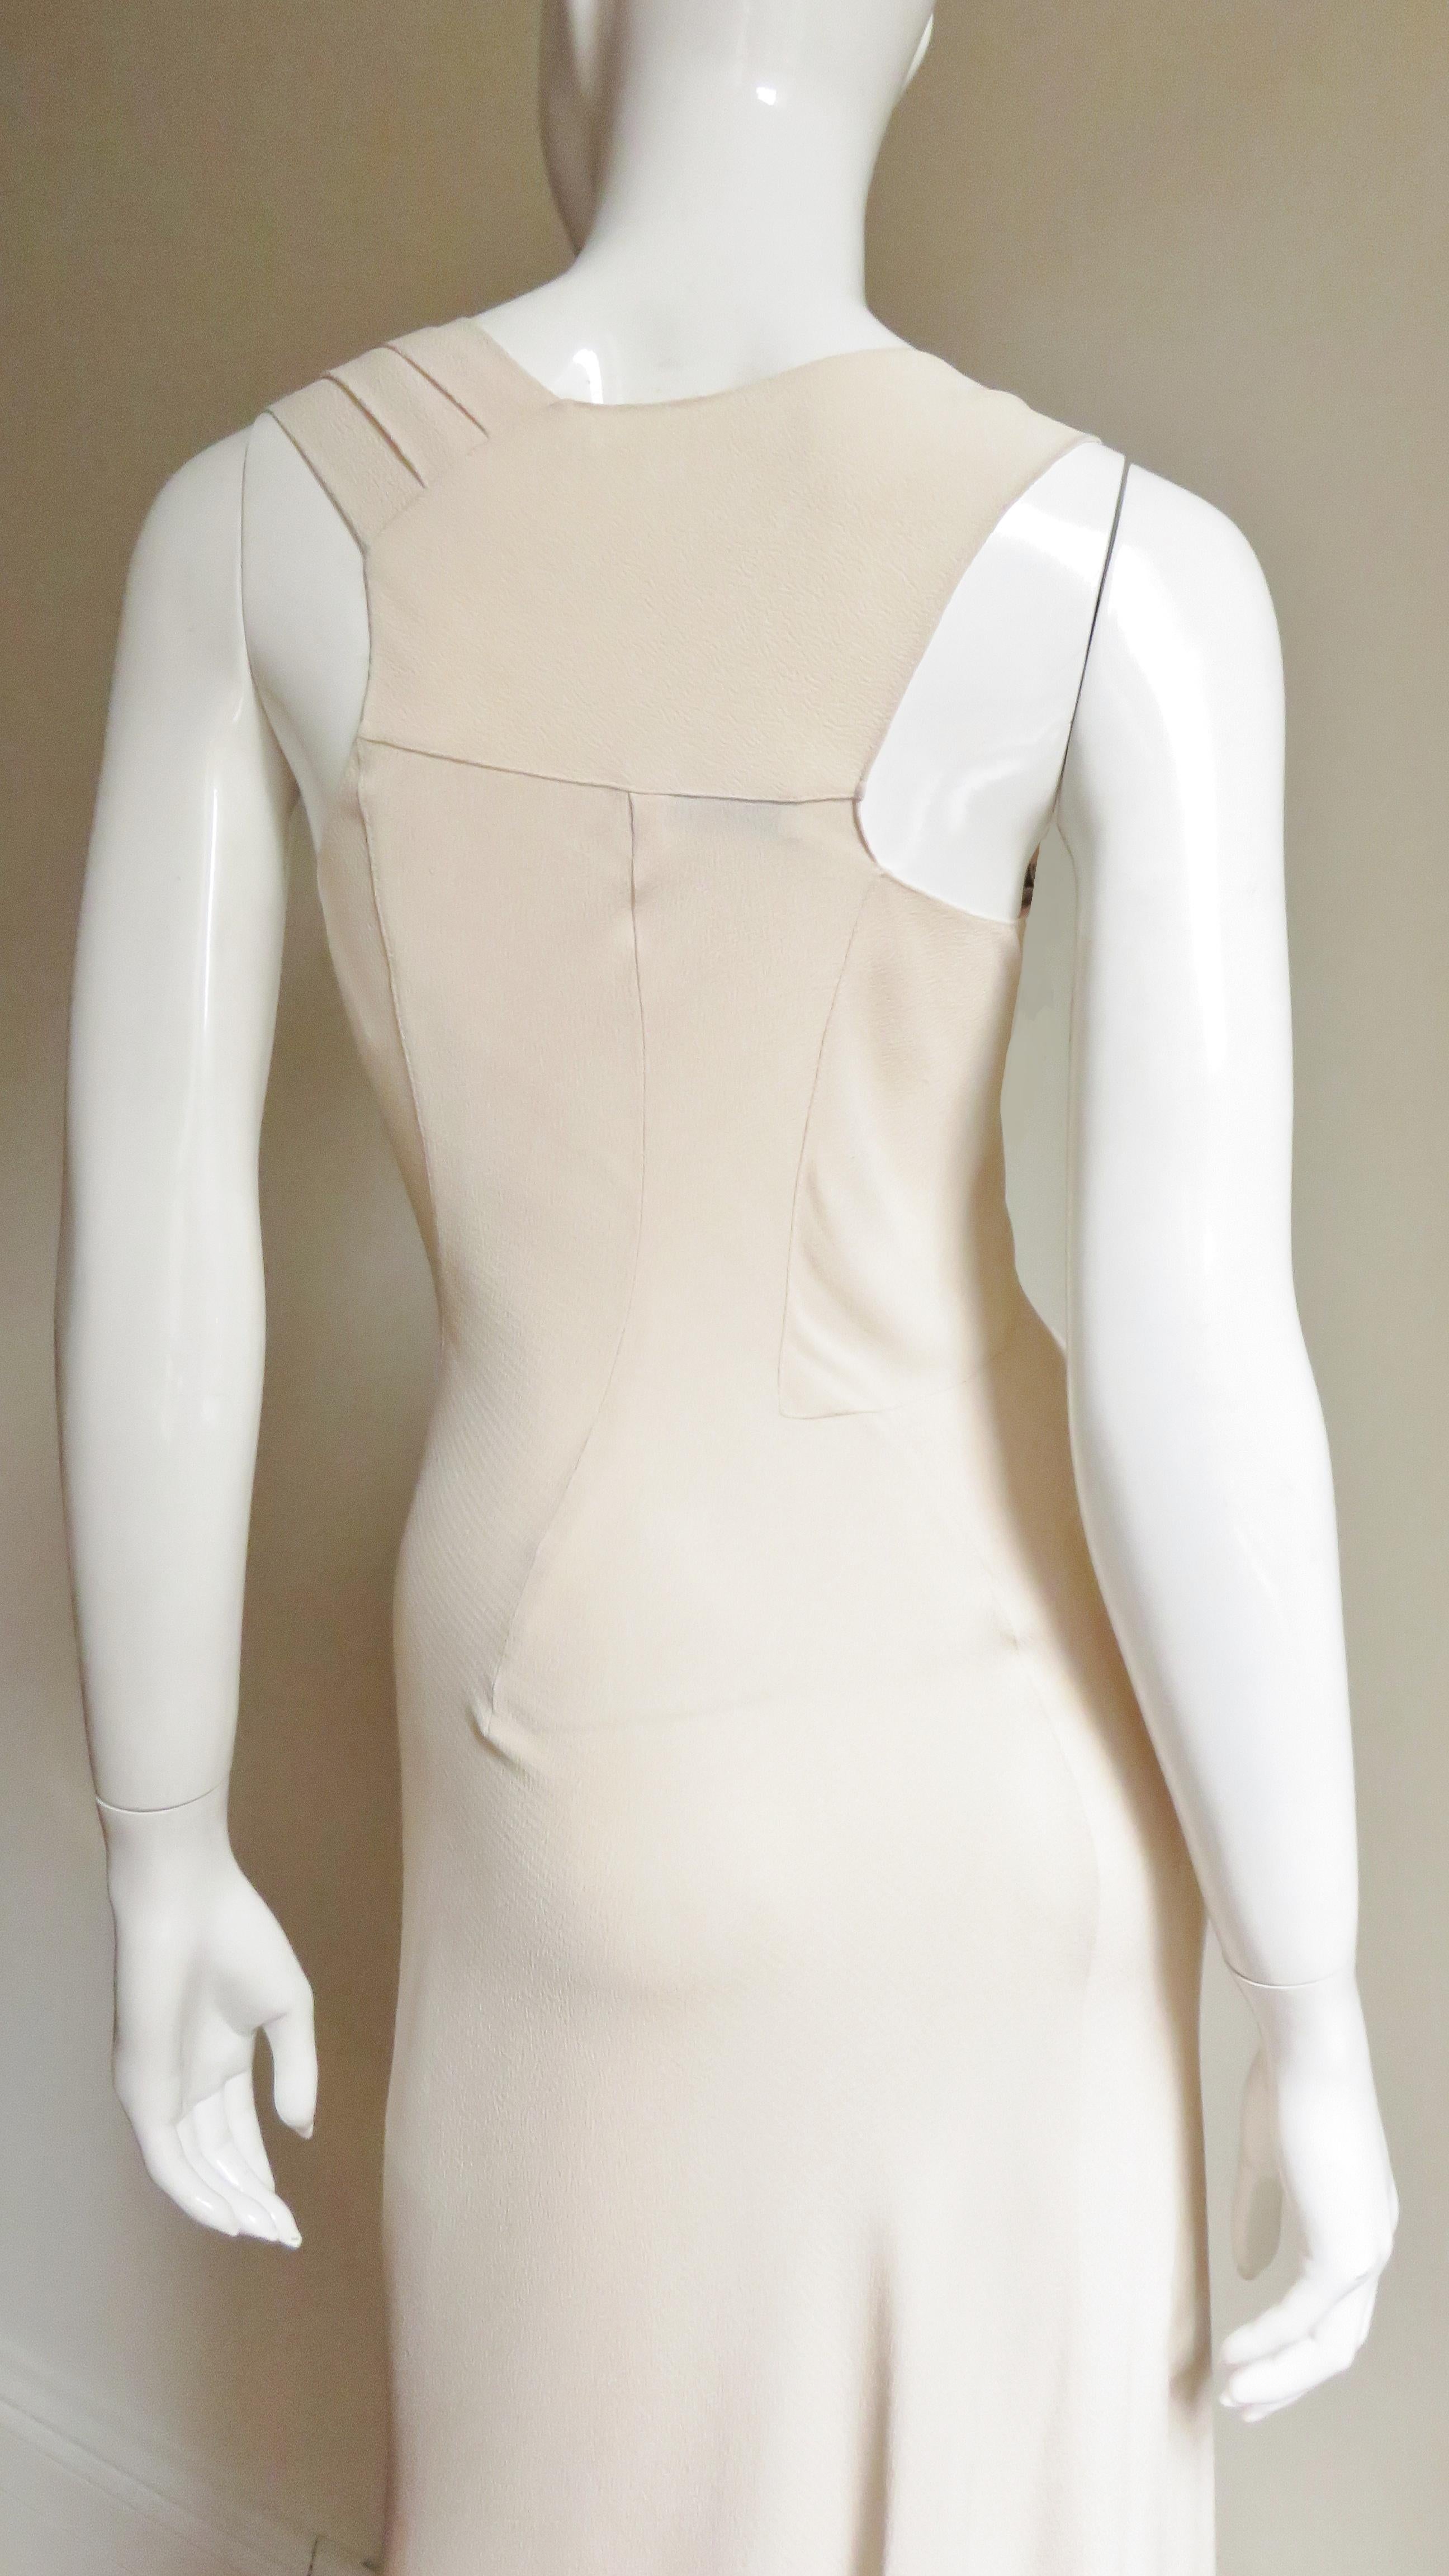 John Galliano for Christian Dior Pale Pink Silk Seam Gown For Sale 2